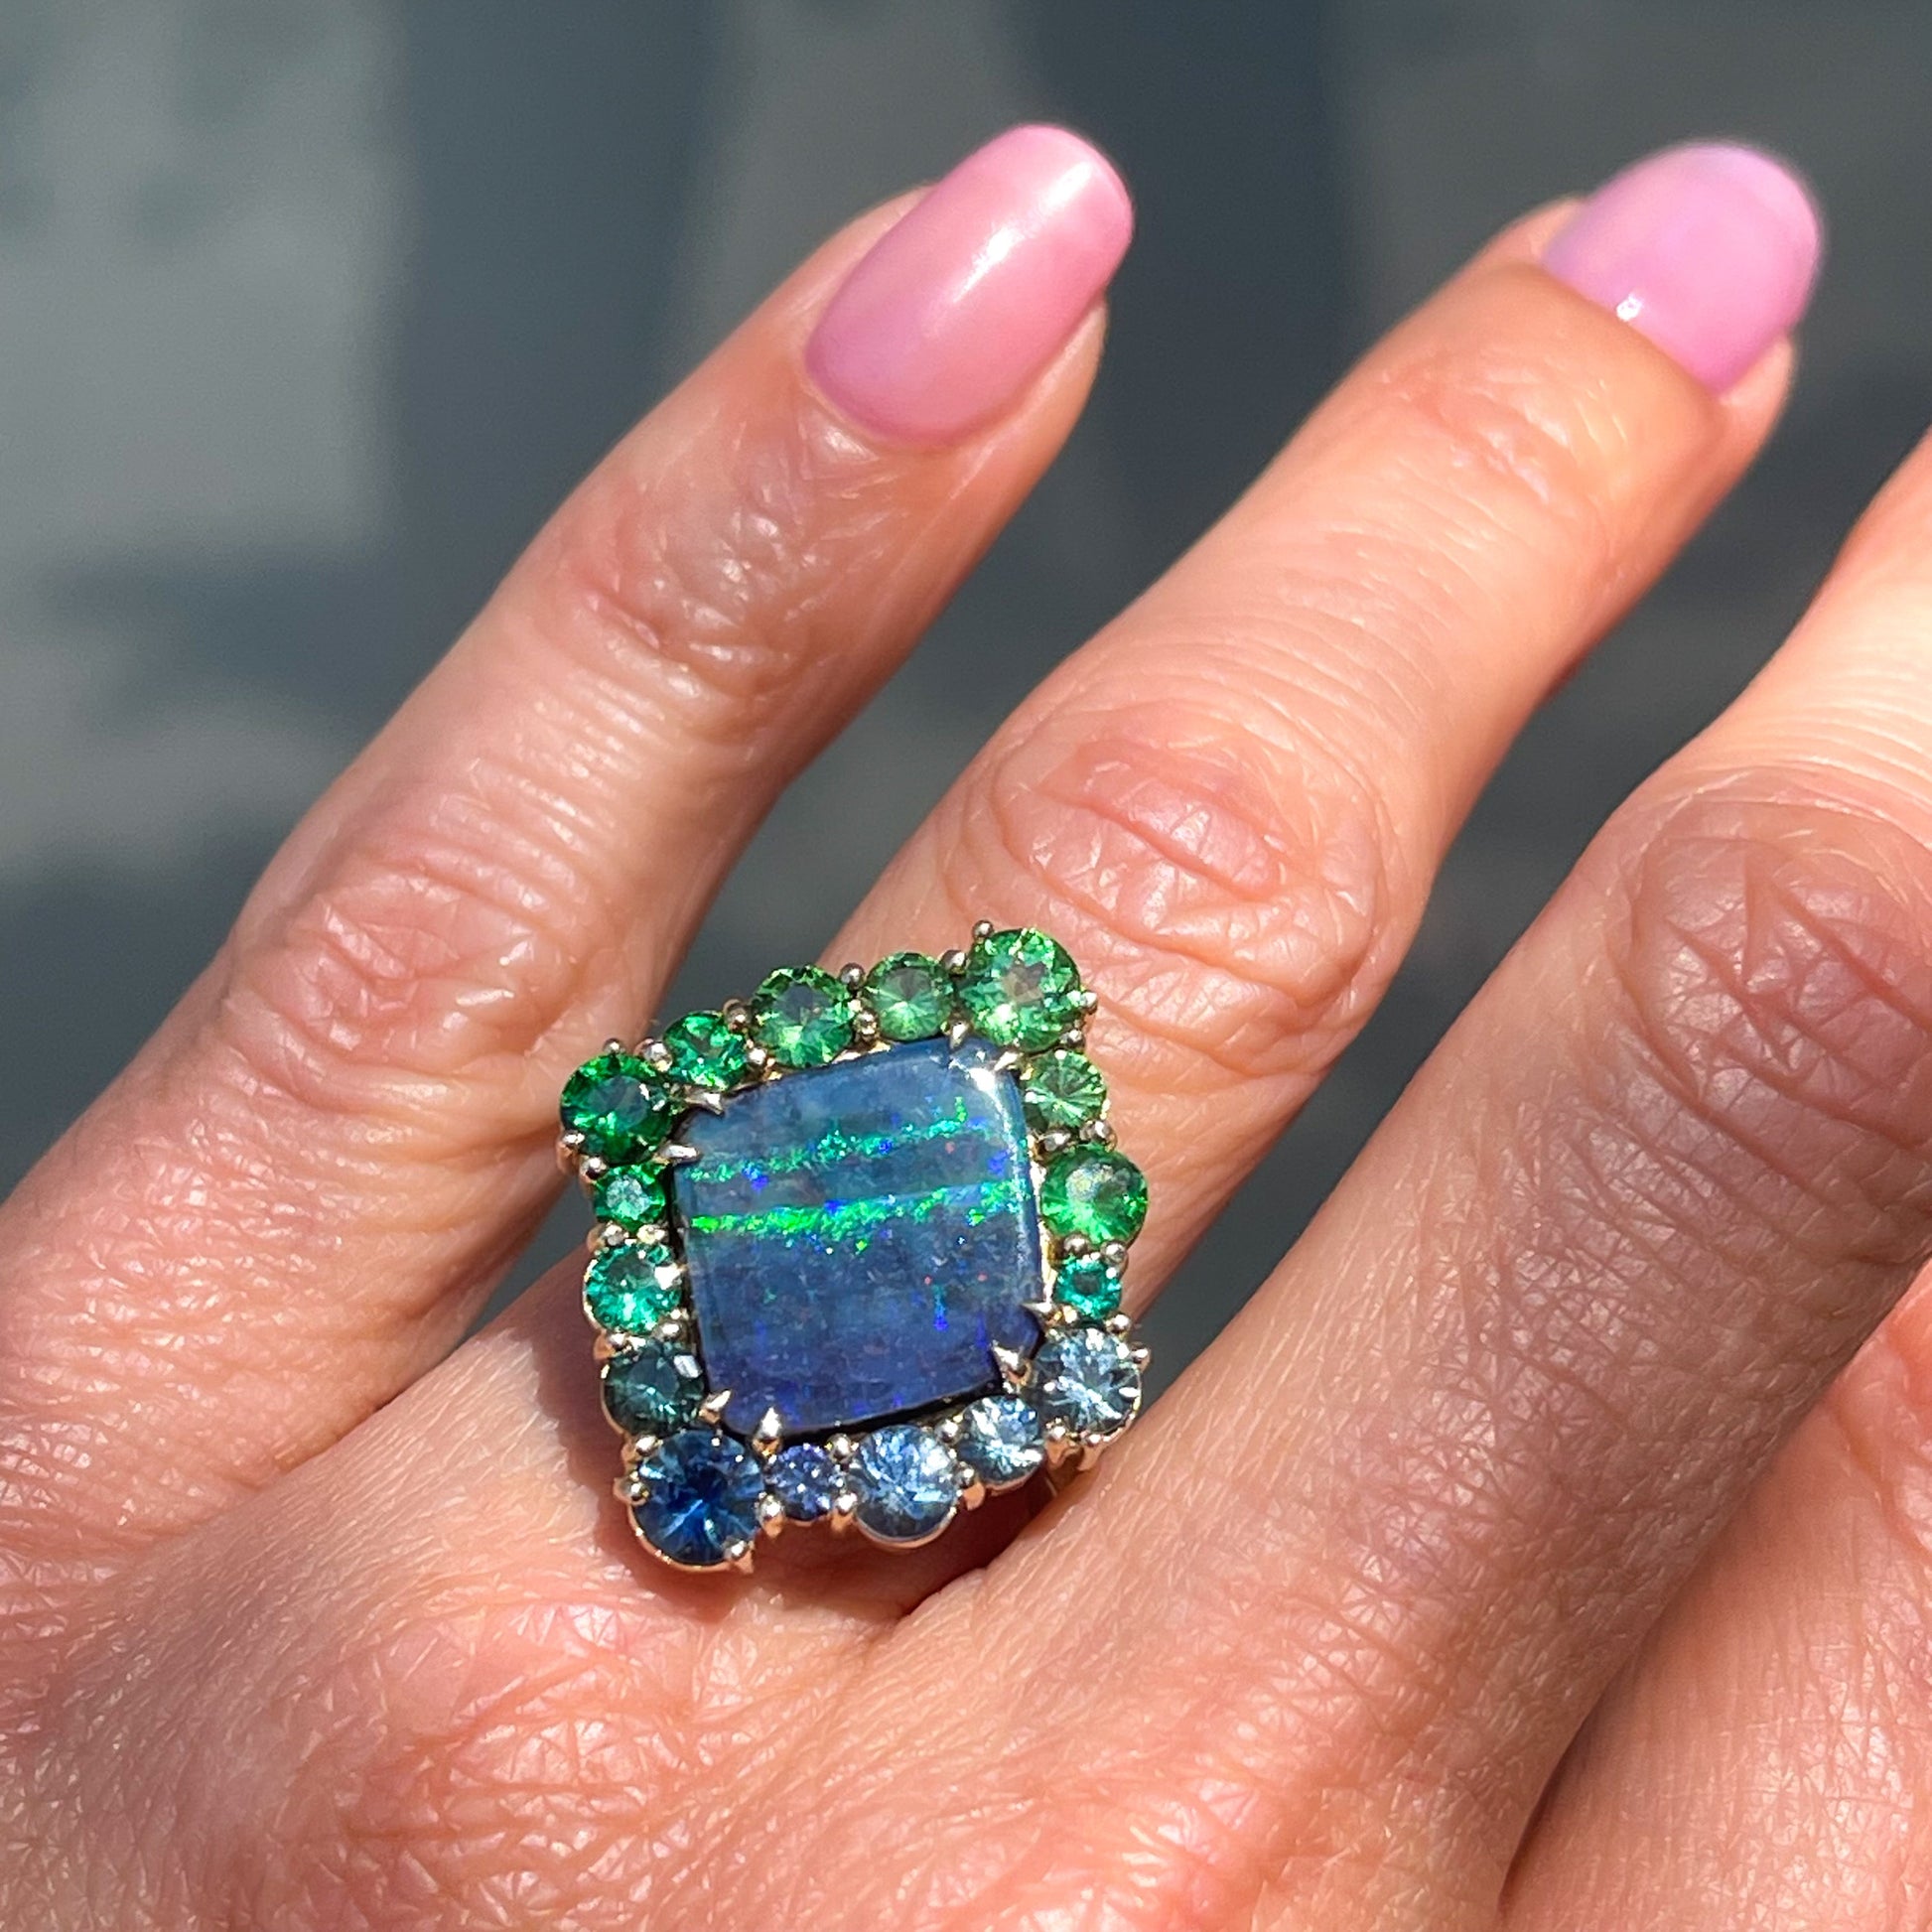 An Australian Opal Ring by NIXIN Jewelry. An opal and sapphire ring with garnets and emeralds.